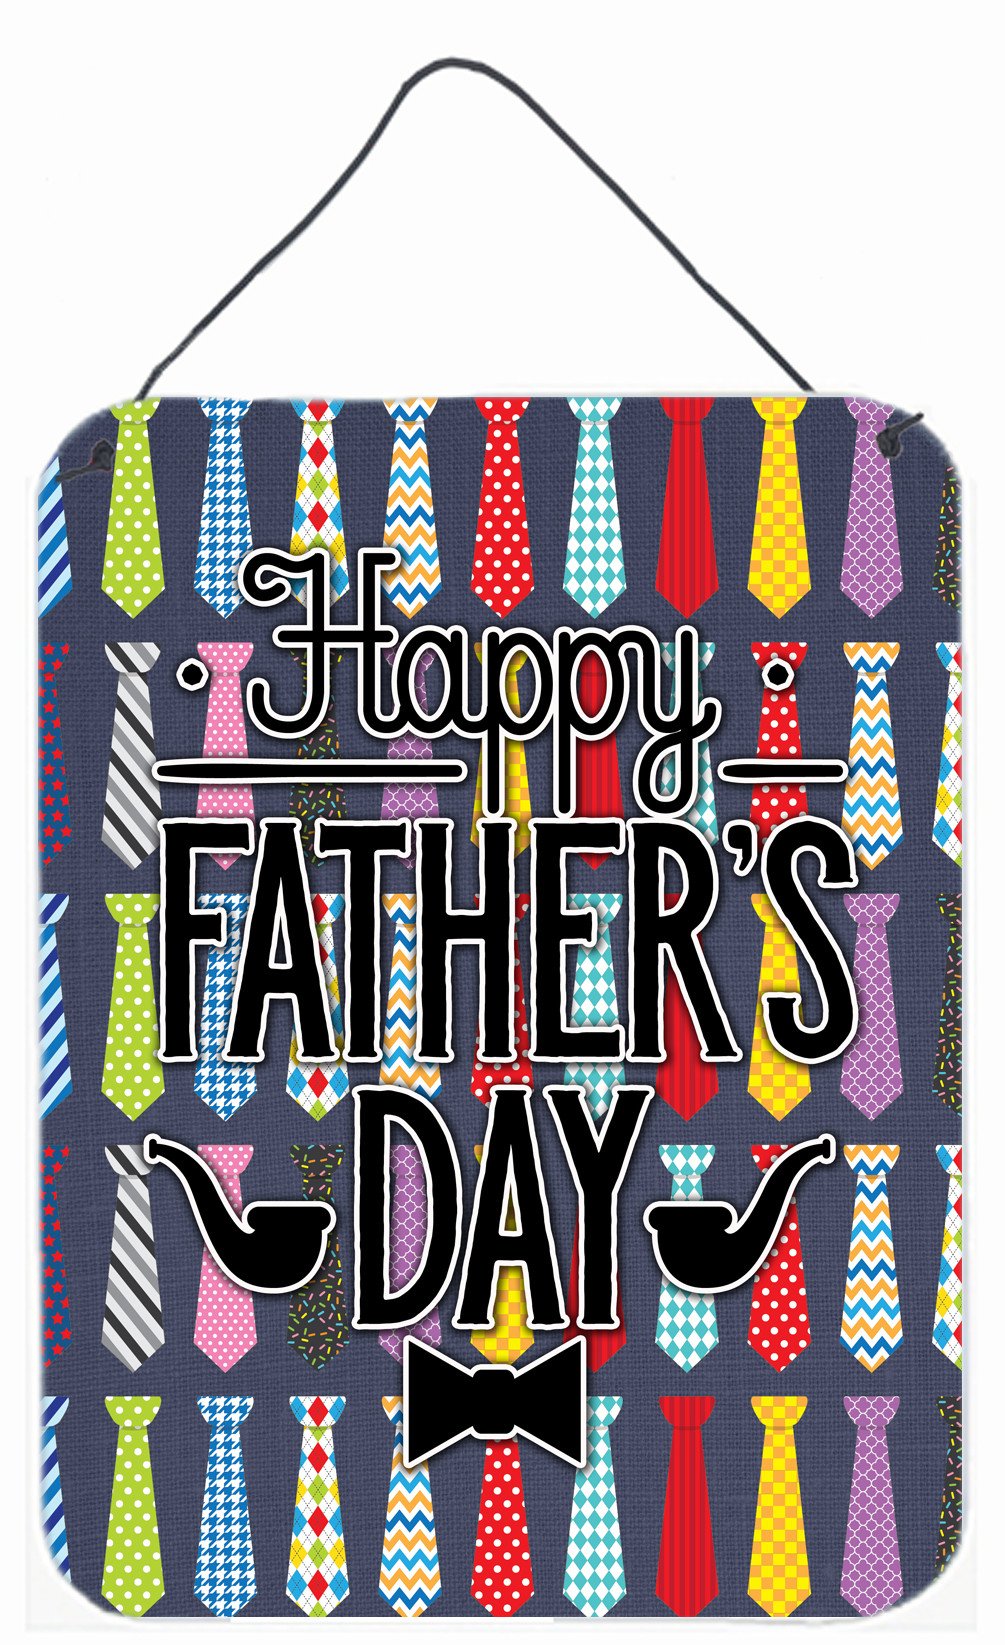 Happy Father's Day Neckties Bright Wall or Door Hanging Prints BB5438DS1216 by Caroline's Treasures